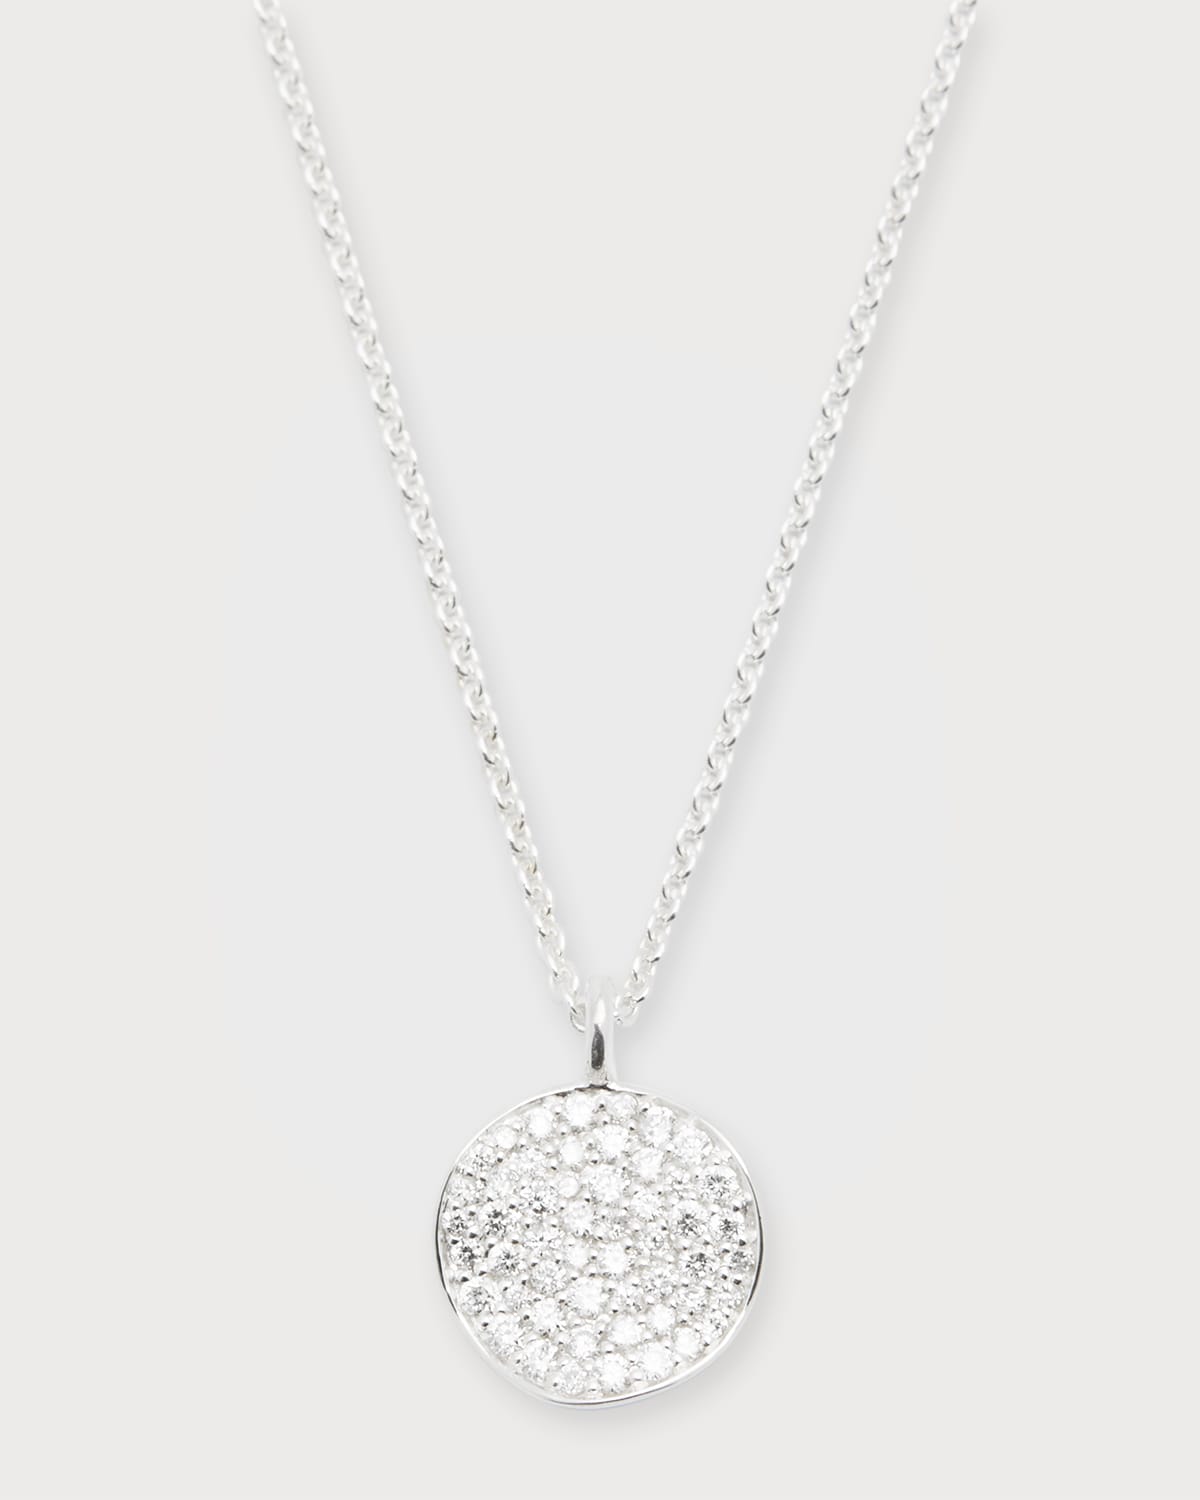 Small Flower Pendant Necklace in Sterling Silver with Diamonds